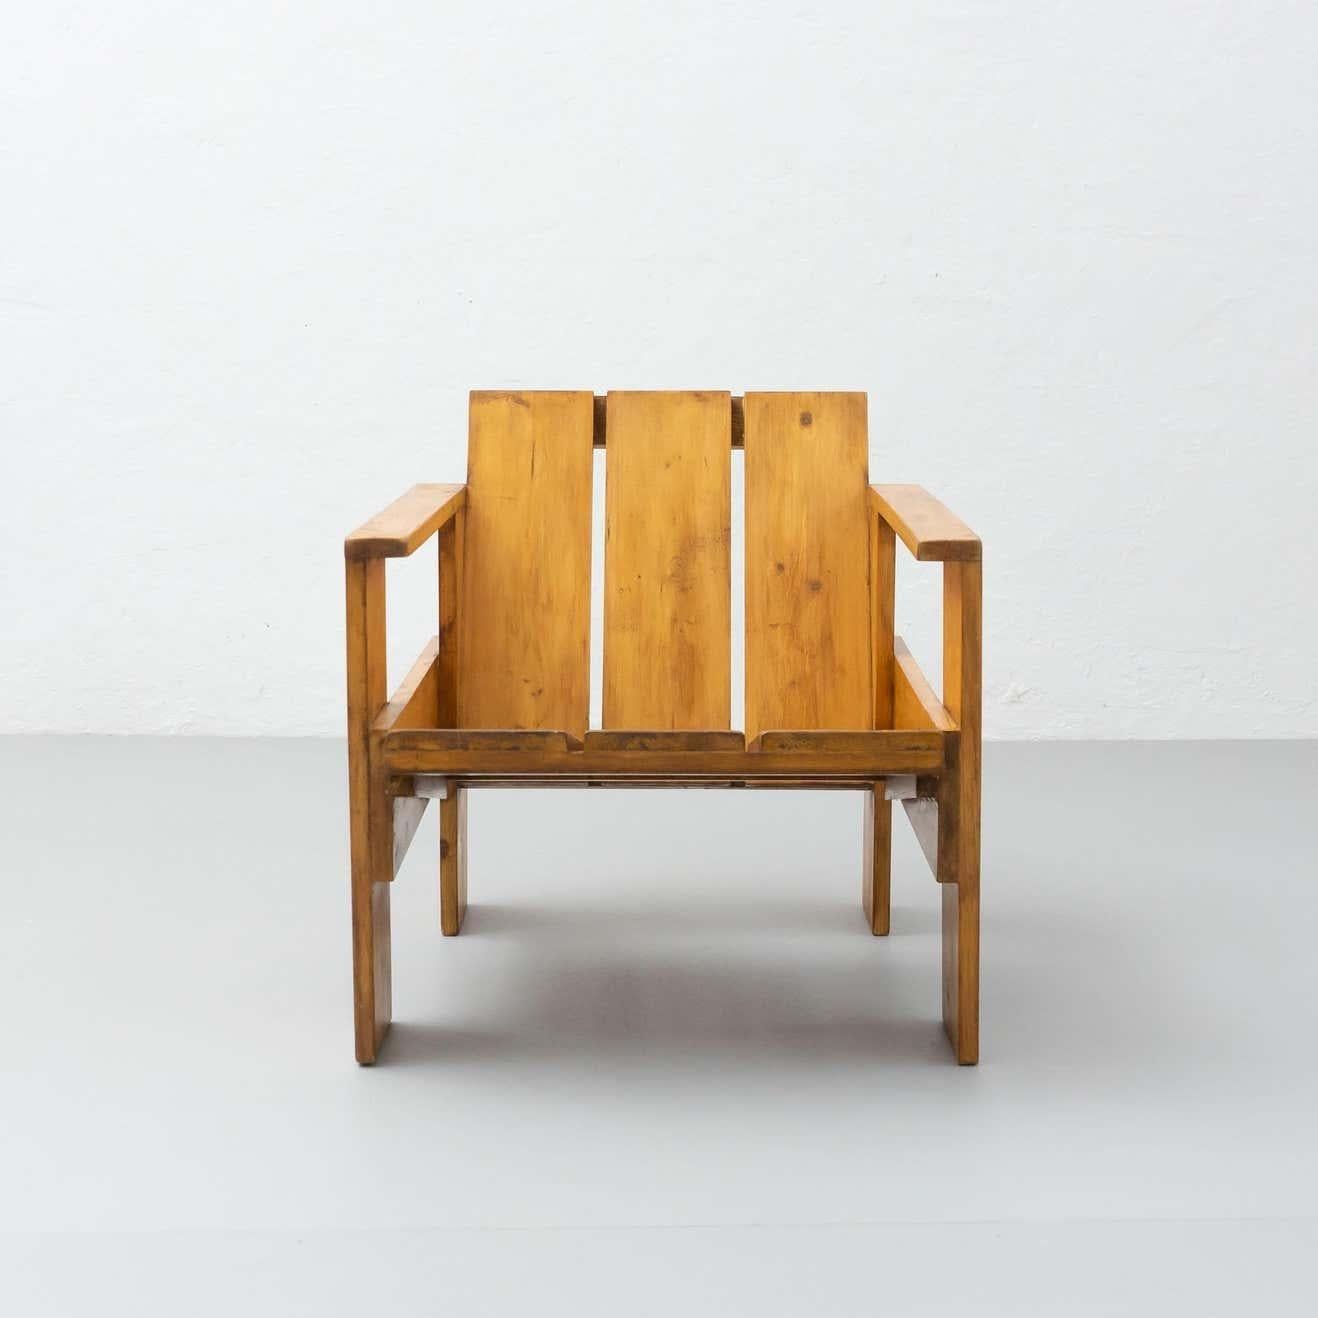 Crate chair designed by Gerrit Thomas Rietveld, executed circa 1950 by Metz and Co in Holland.

In good original condition, preserving a beautiful patina.

Materials
wood

Dimensions:
D 72.5 cm x W 57.9 cm x H 59 cm.

Gerrit Thomas